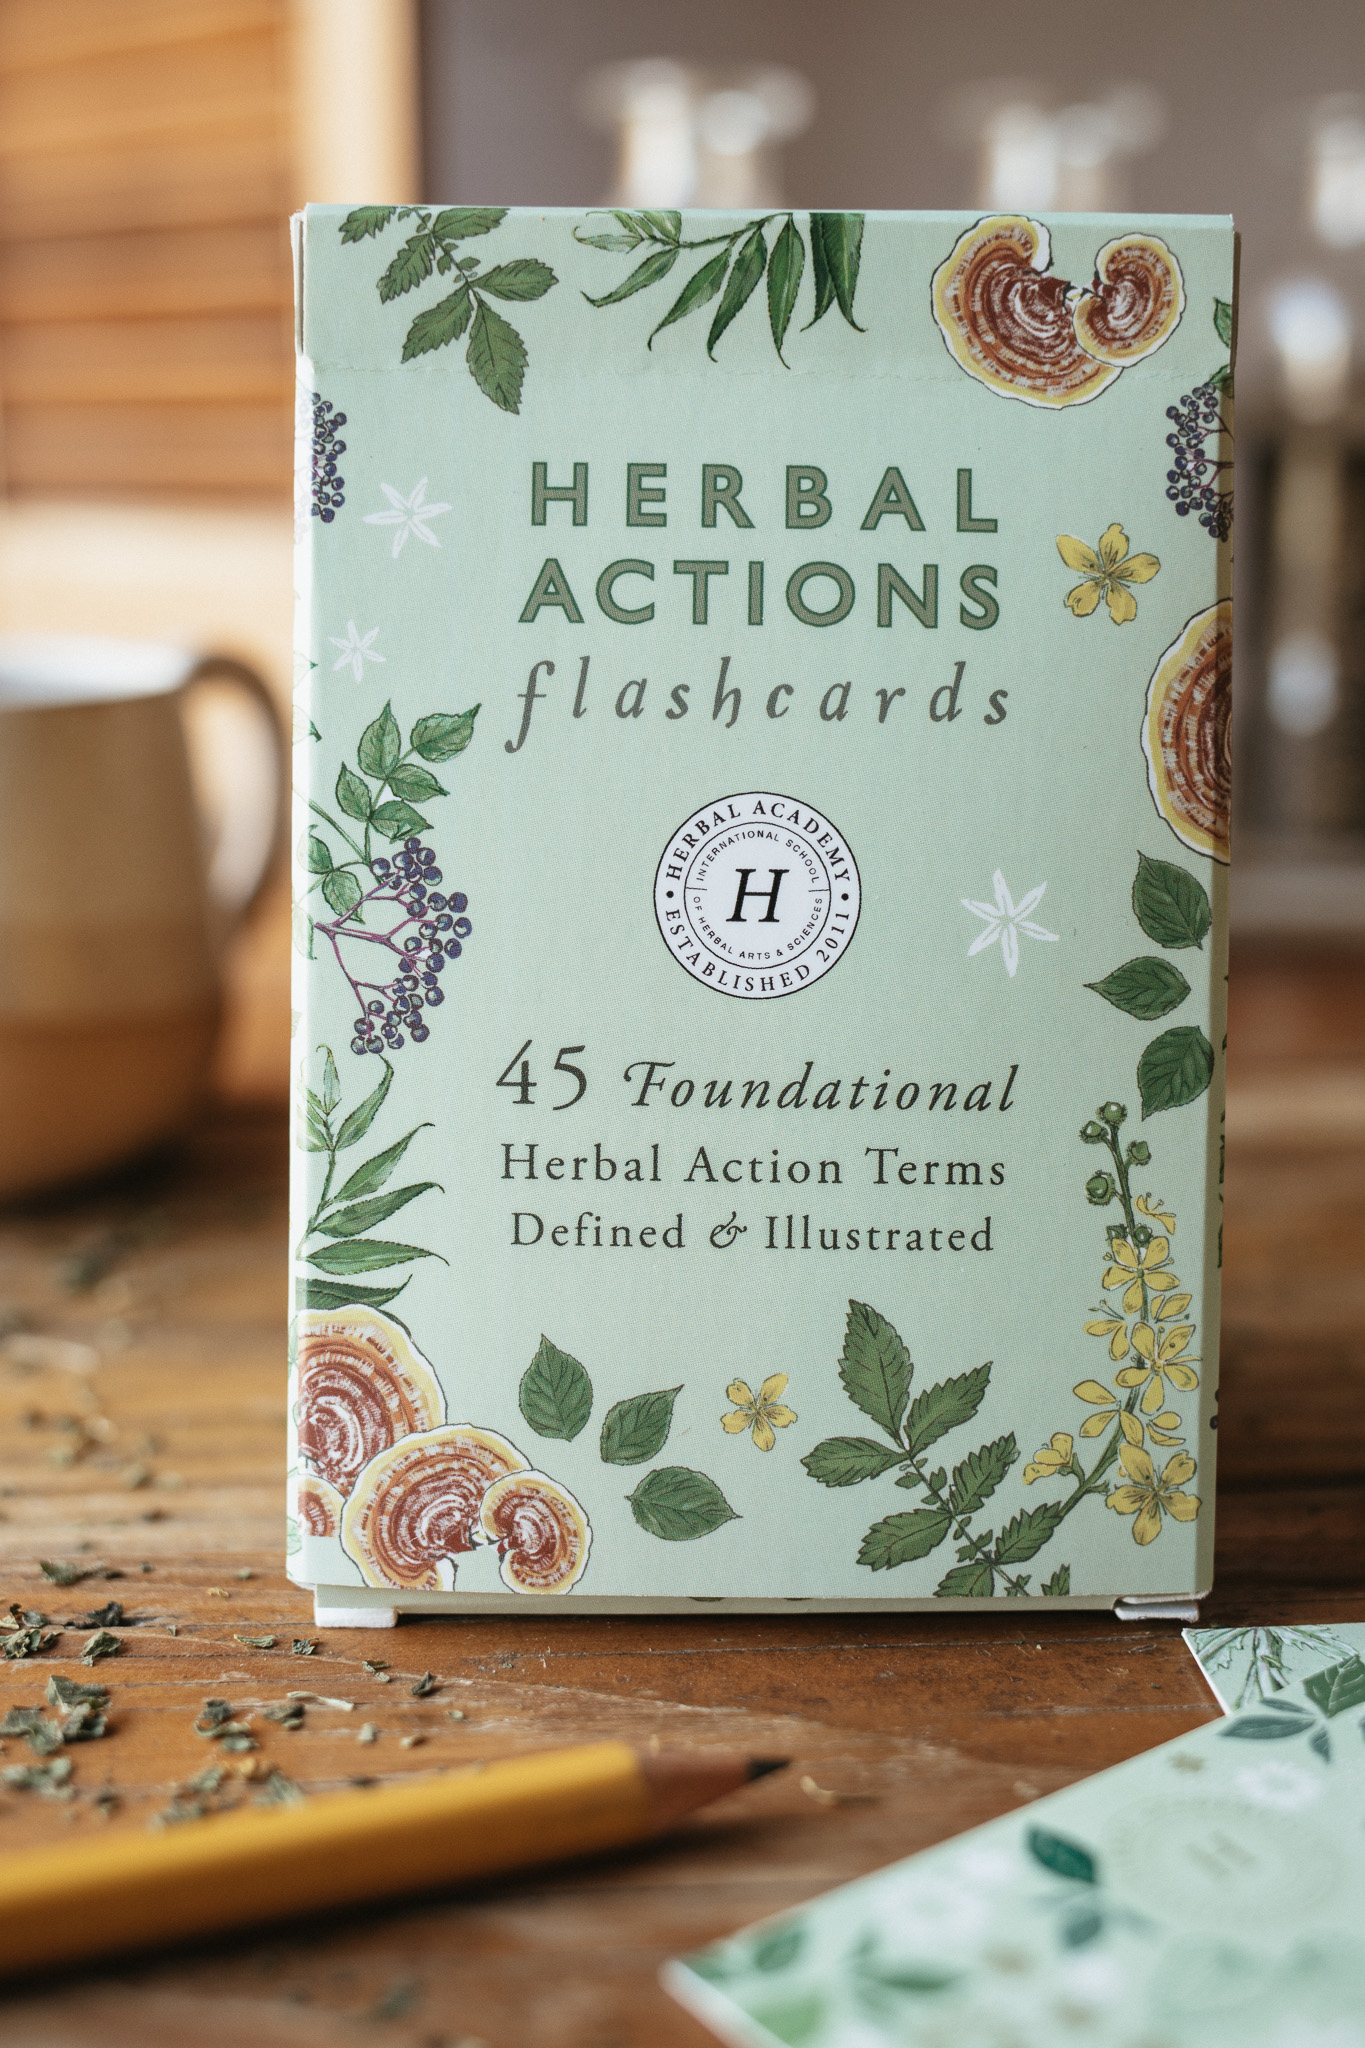 Herbal Actions Flashcards Edited (1)